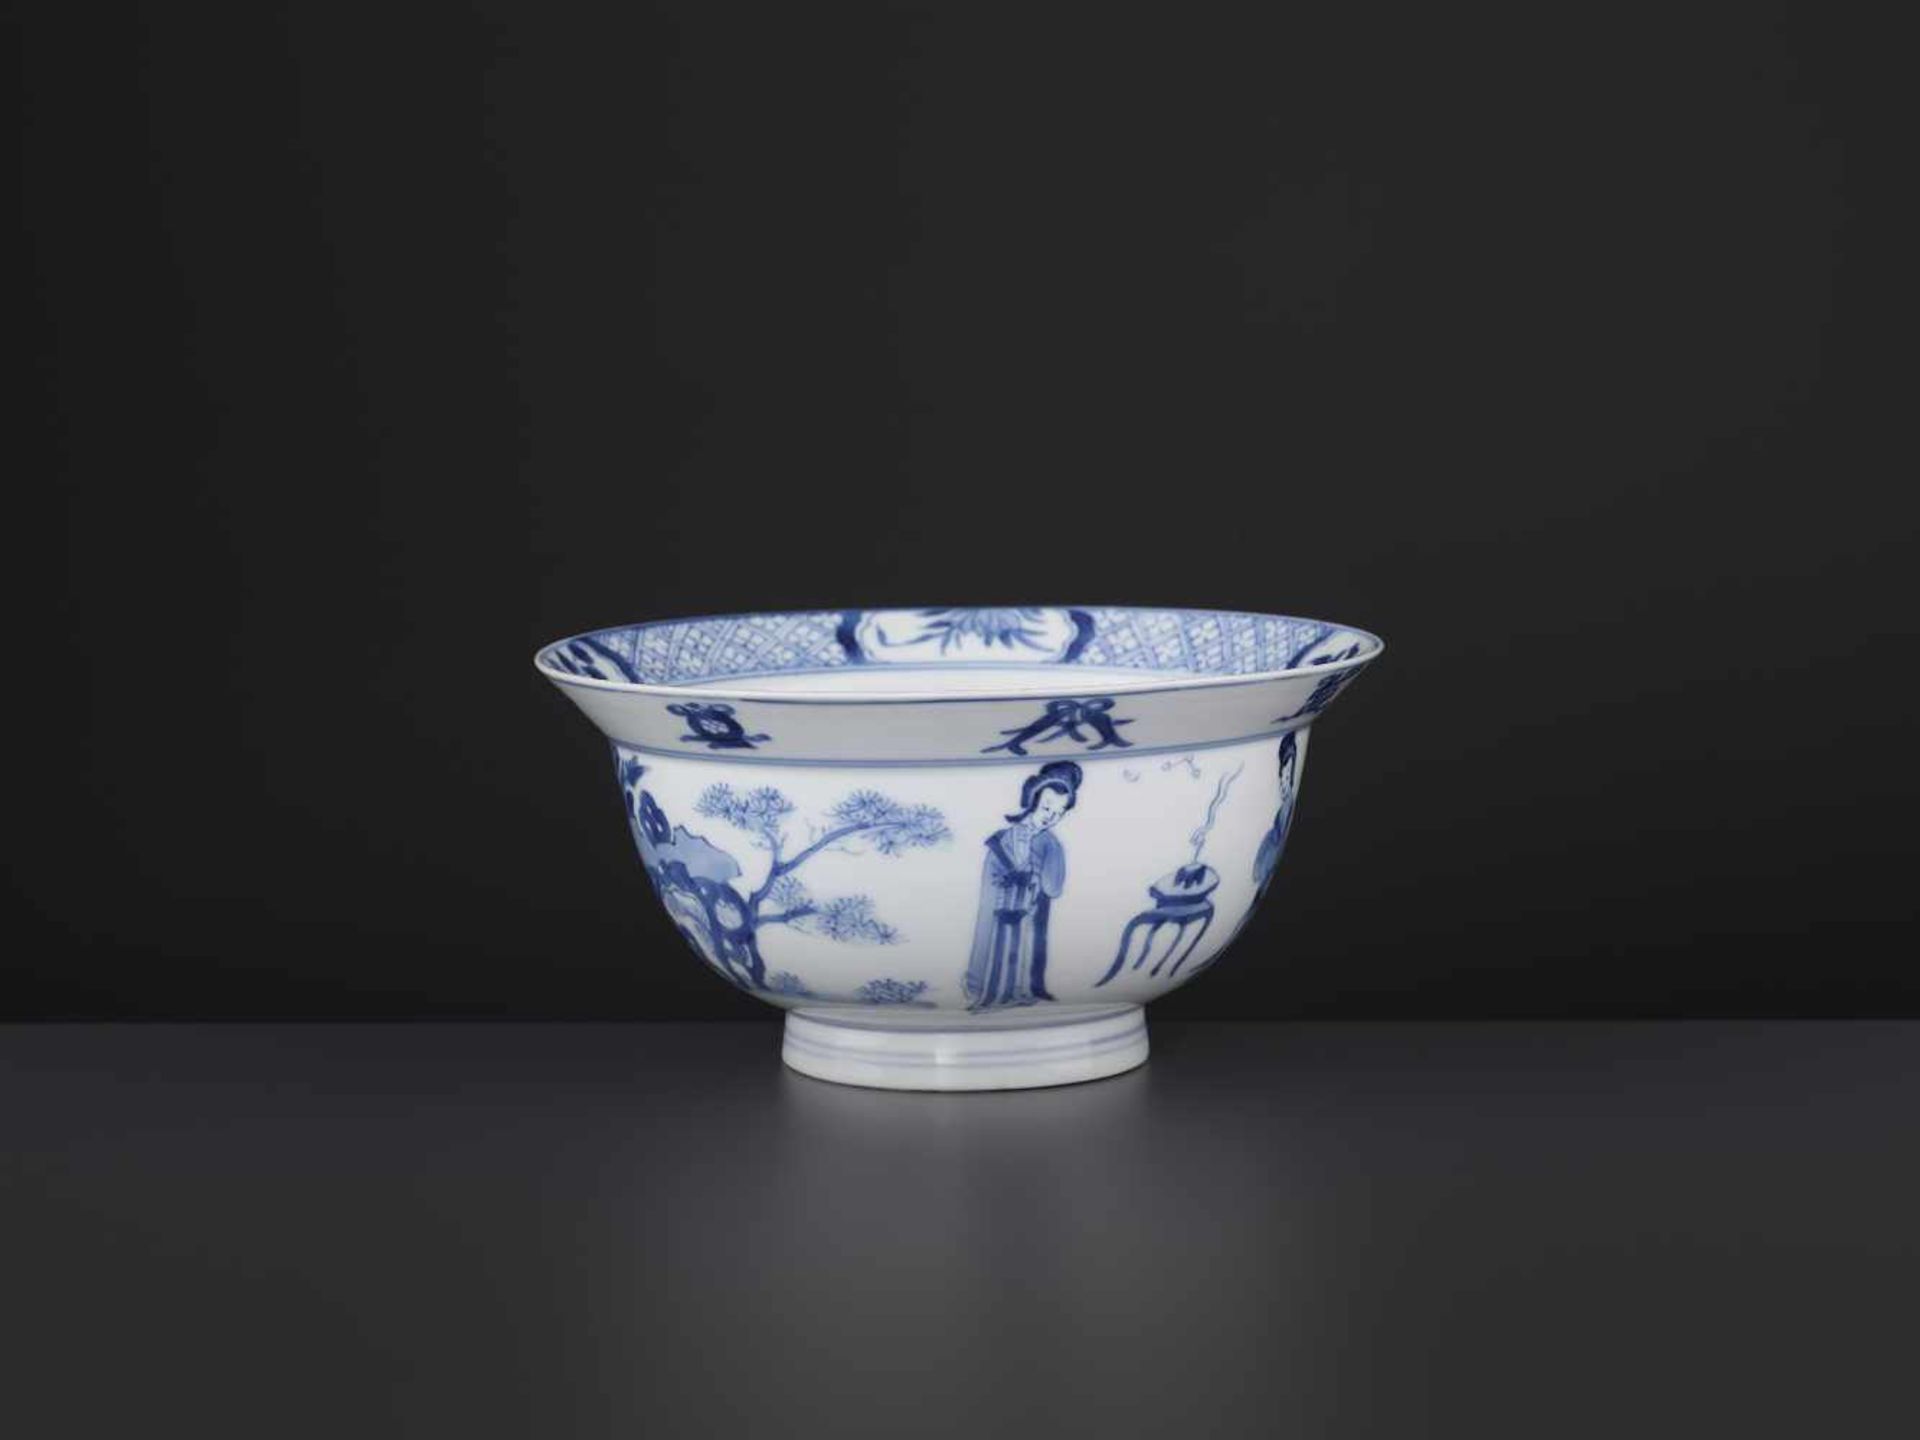 A KANGXI BLUE & WHITE KLAPMUTS BOWLChina, 1662-1722. Delicately painted with scenes from ‘Romance of - Image 3 of 8